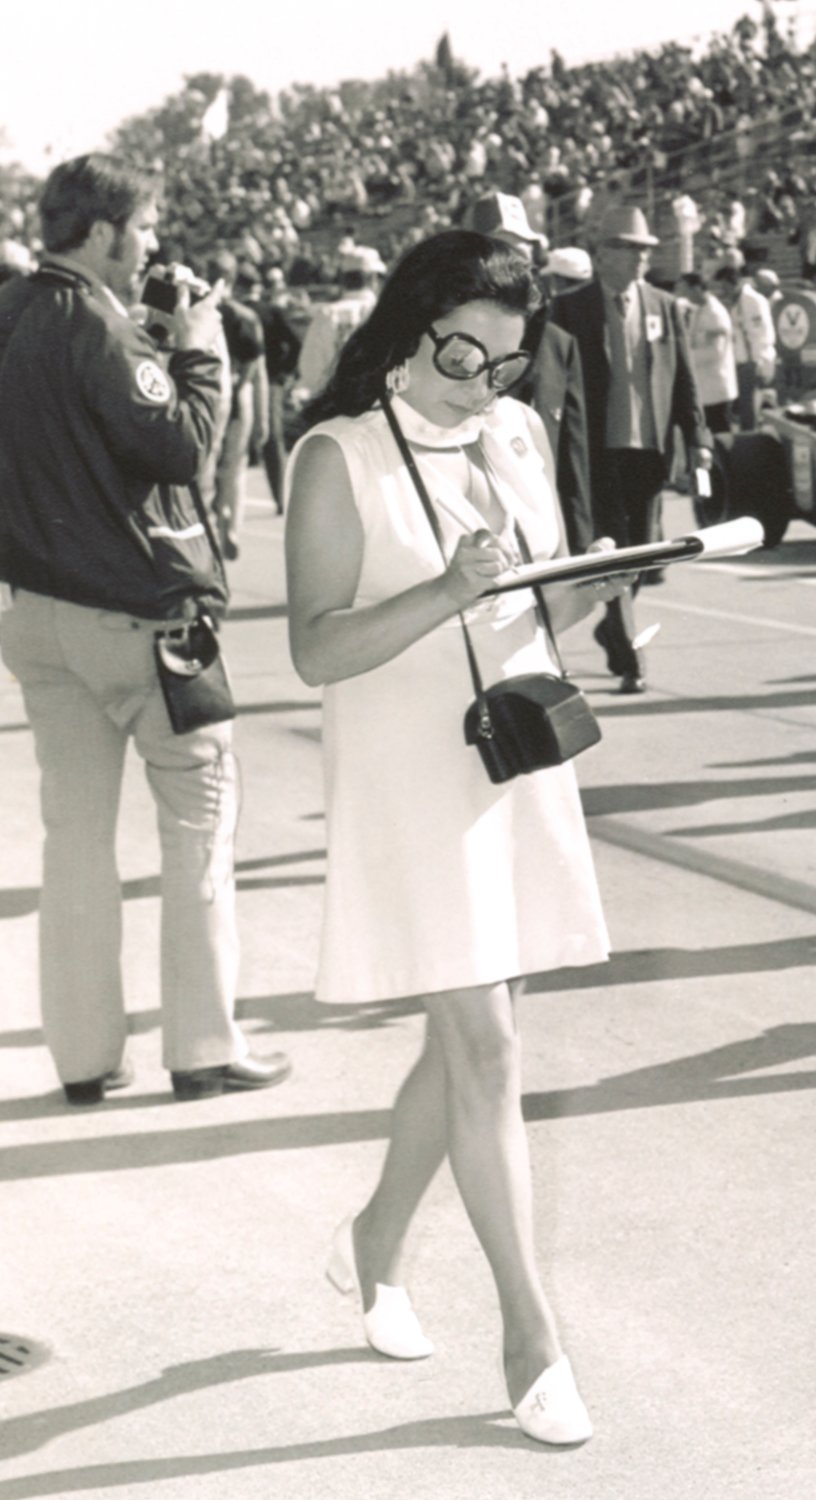 Crawfordsville native Bettie Cadou walks on the track at the Indianapolis Motor Speedway. Cadou was the first female journalist to receive a silver badge and gain access to Gasoline Alley at IMS in 1971.